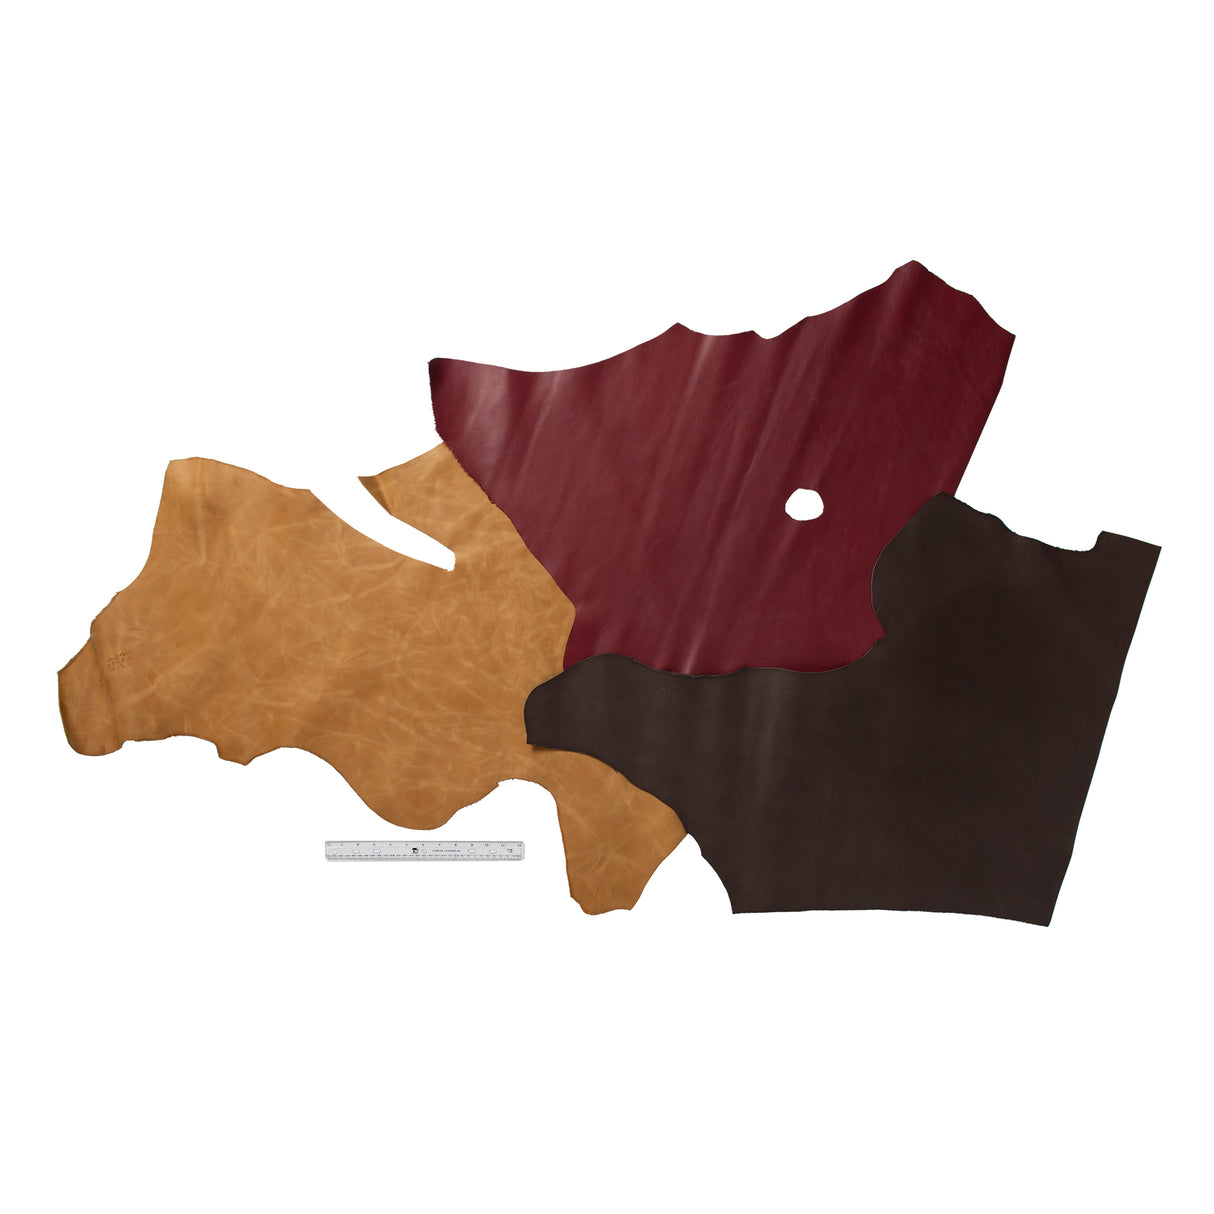 Chrome Tanned Leather Remnants, Assorted Colors, 3 lb. Bag